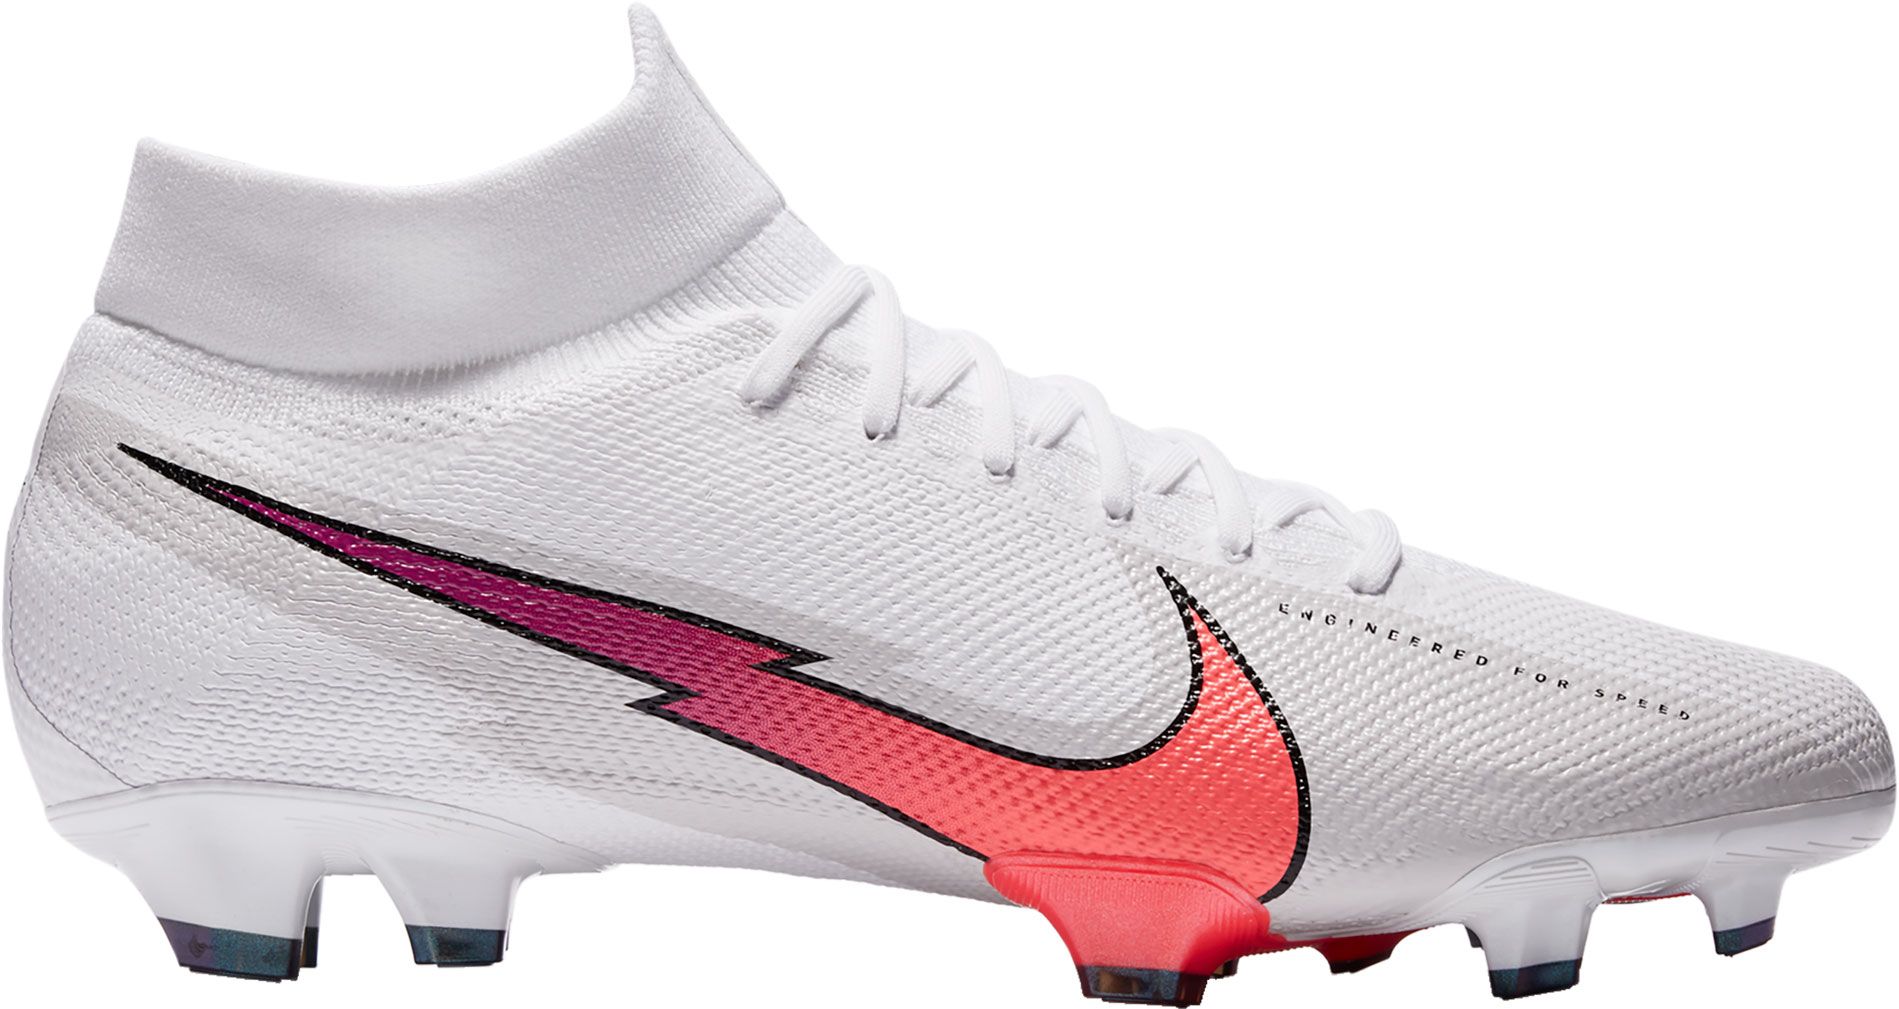 nike men's mercurial superfly fg soccer cleat